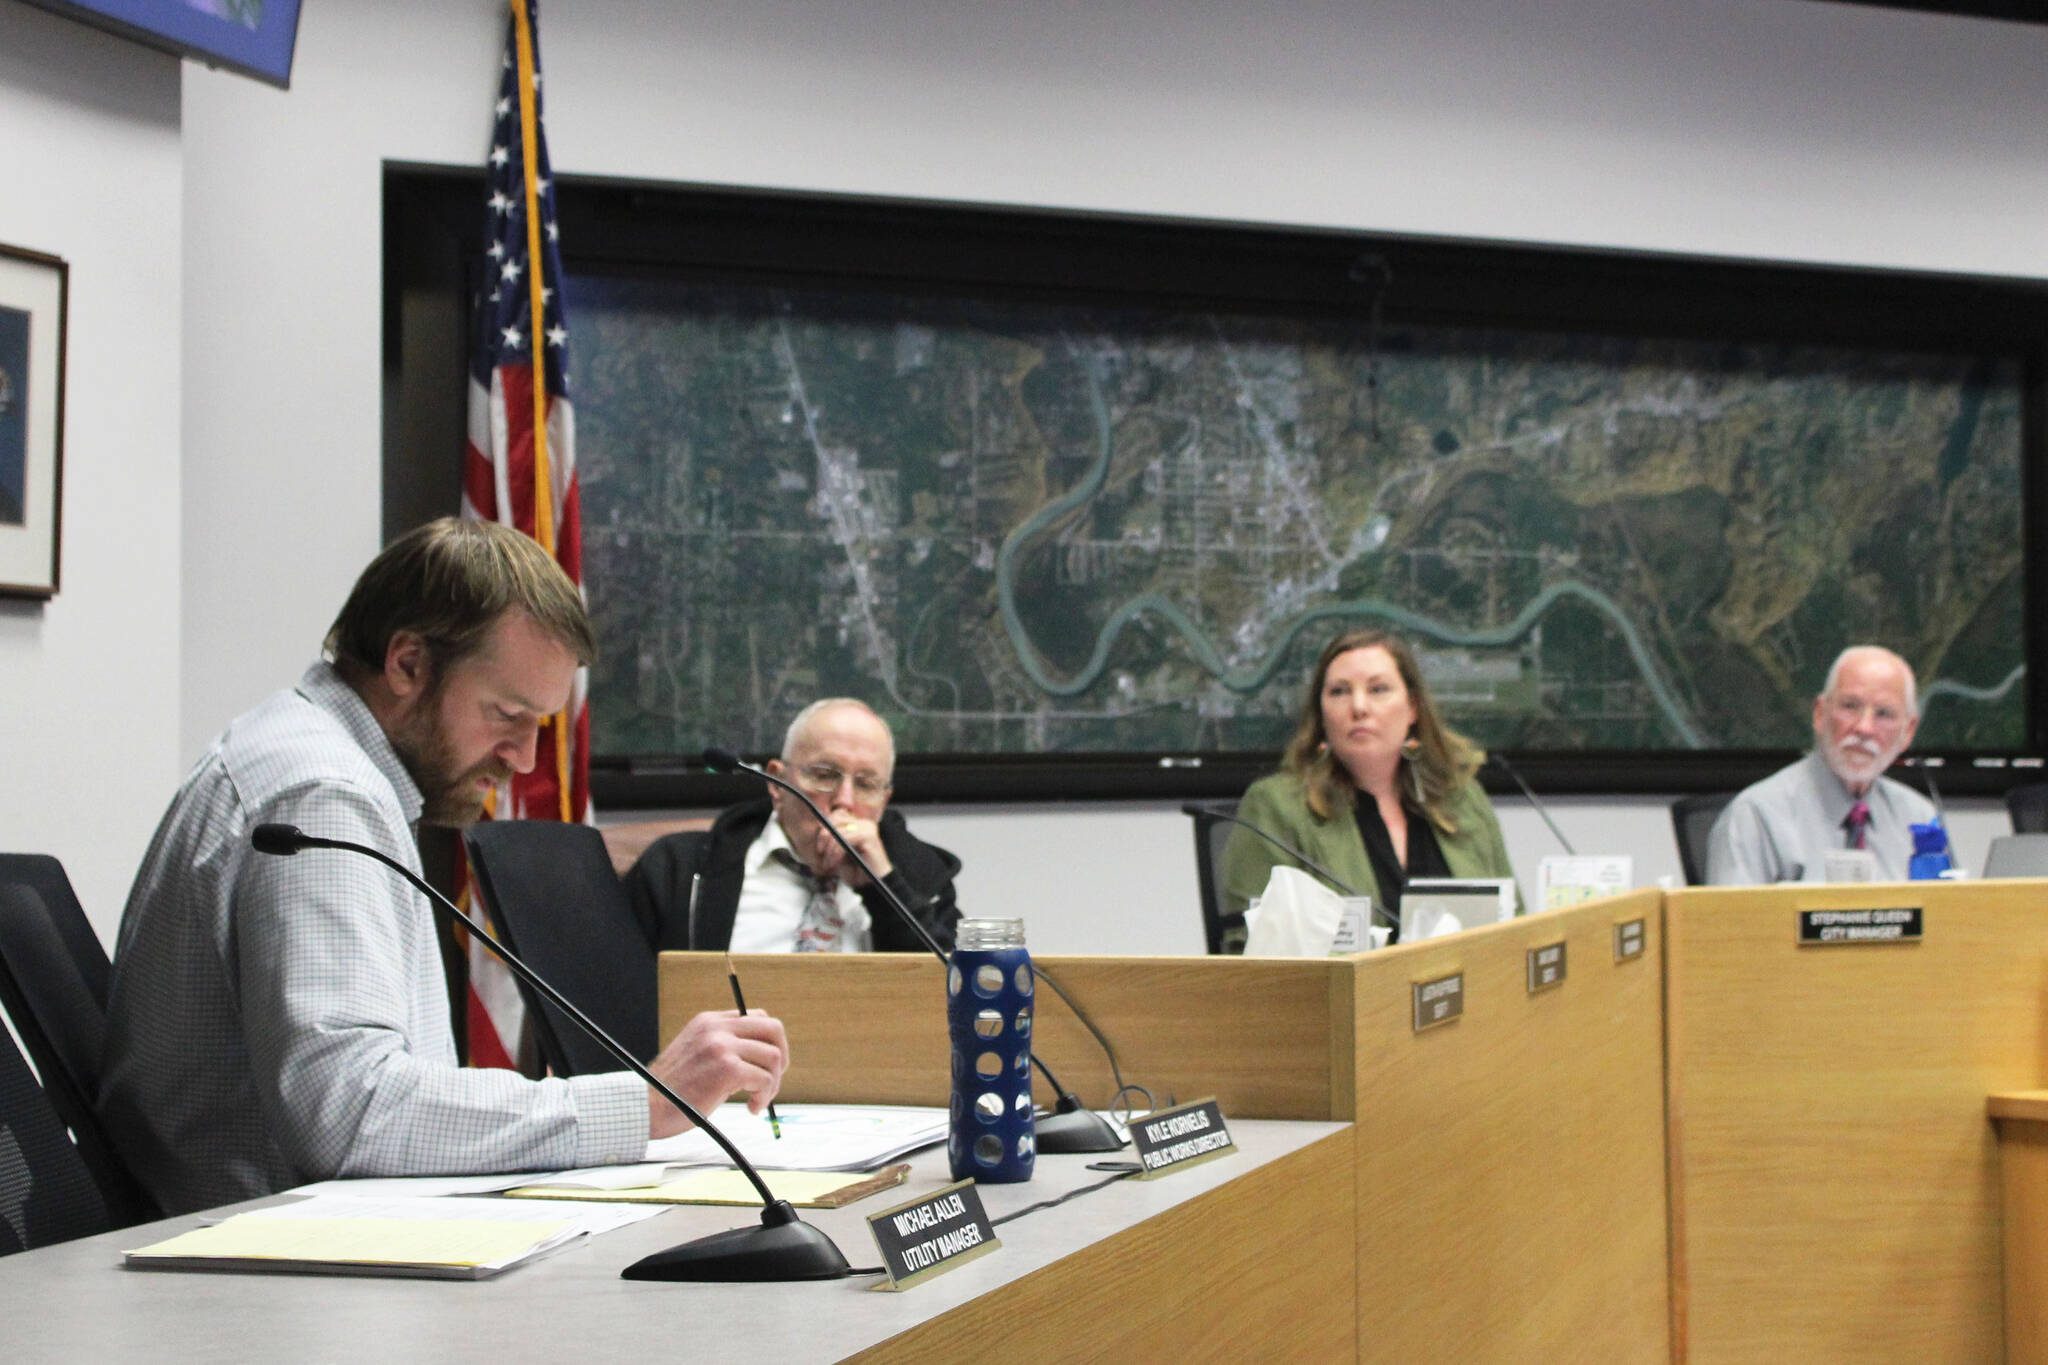 Soldotna Public Works Director Kyle Kornelis, left, talks about the Soldotna field house project during a Soldotna City Council meeting on Wednesday, Dec. 14, 2022 in Soldotna, Alaska. (Ashlyn O’Hara/Peninsula Clarion)